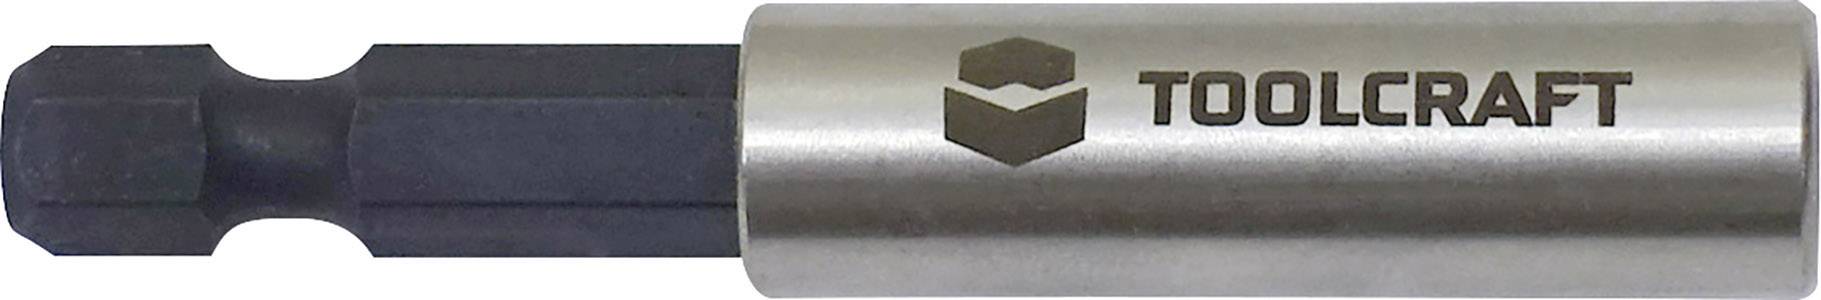 TOOLCRAFT TO-6918741 Bithalter 6,3 mm (1/4\") mit Magnet 60 mm 1/4\" (6.3 mm)